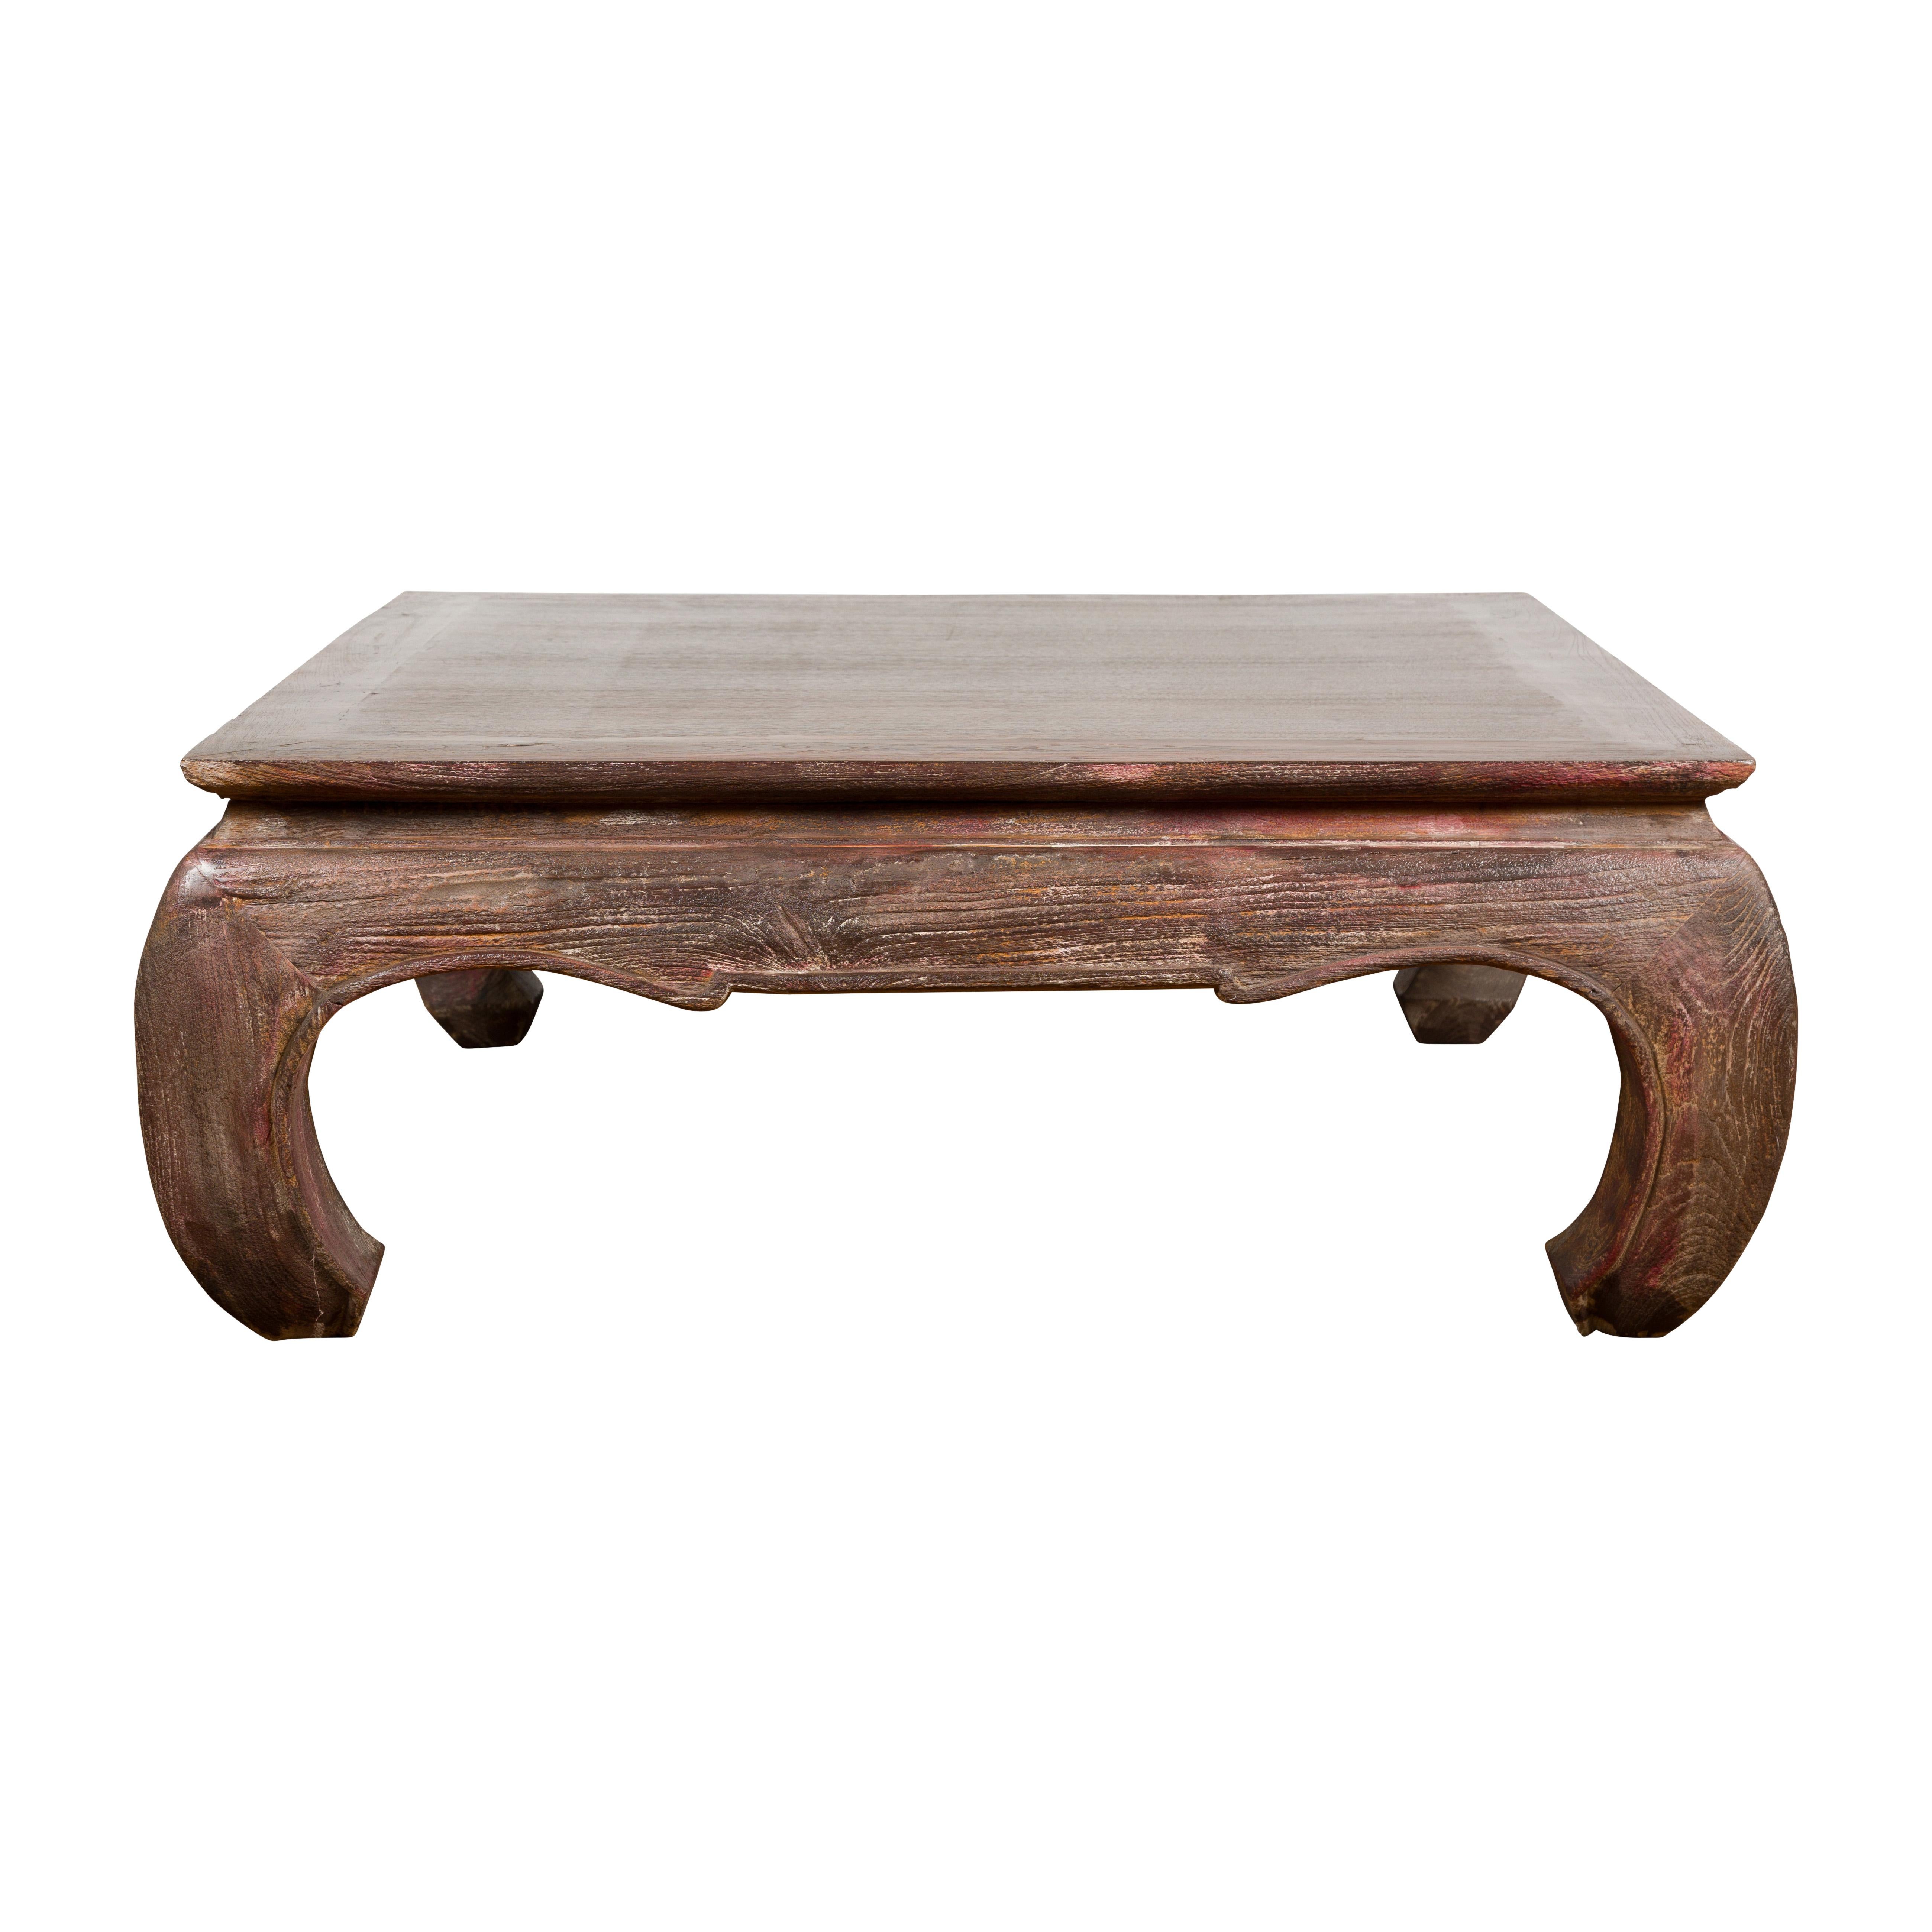 Vintage Coffee Table with Chow Legs, Carved Apron and Distressed Patina For Sale